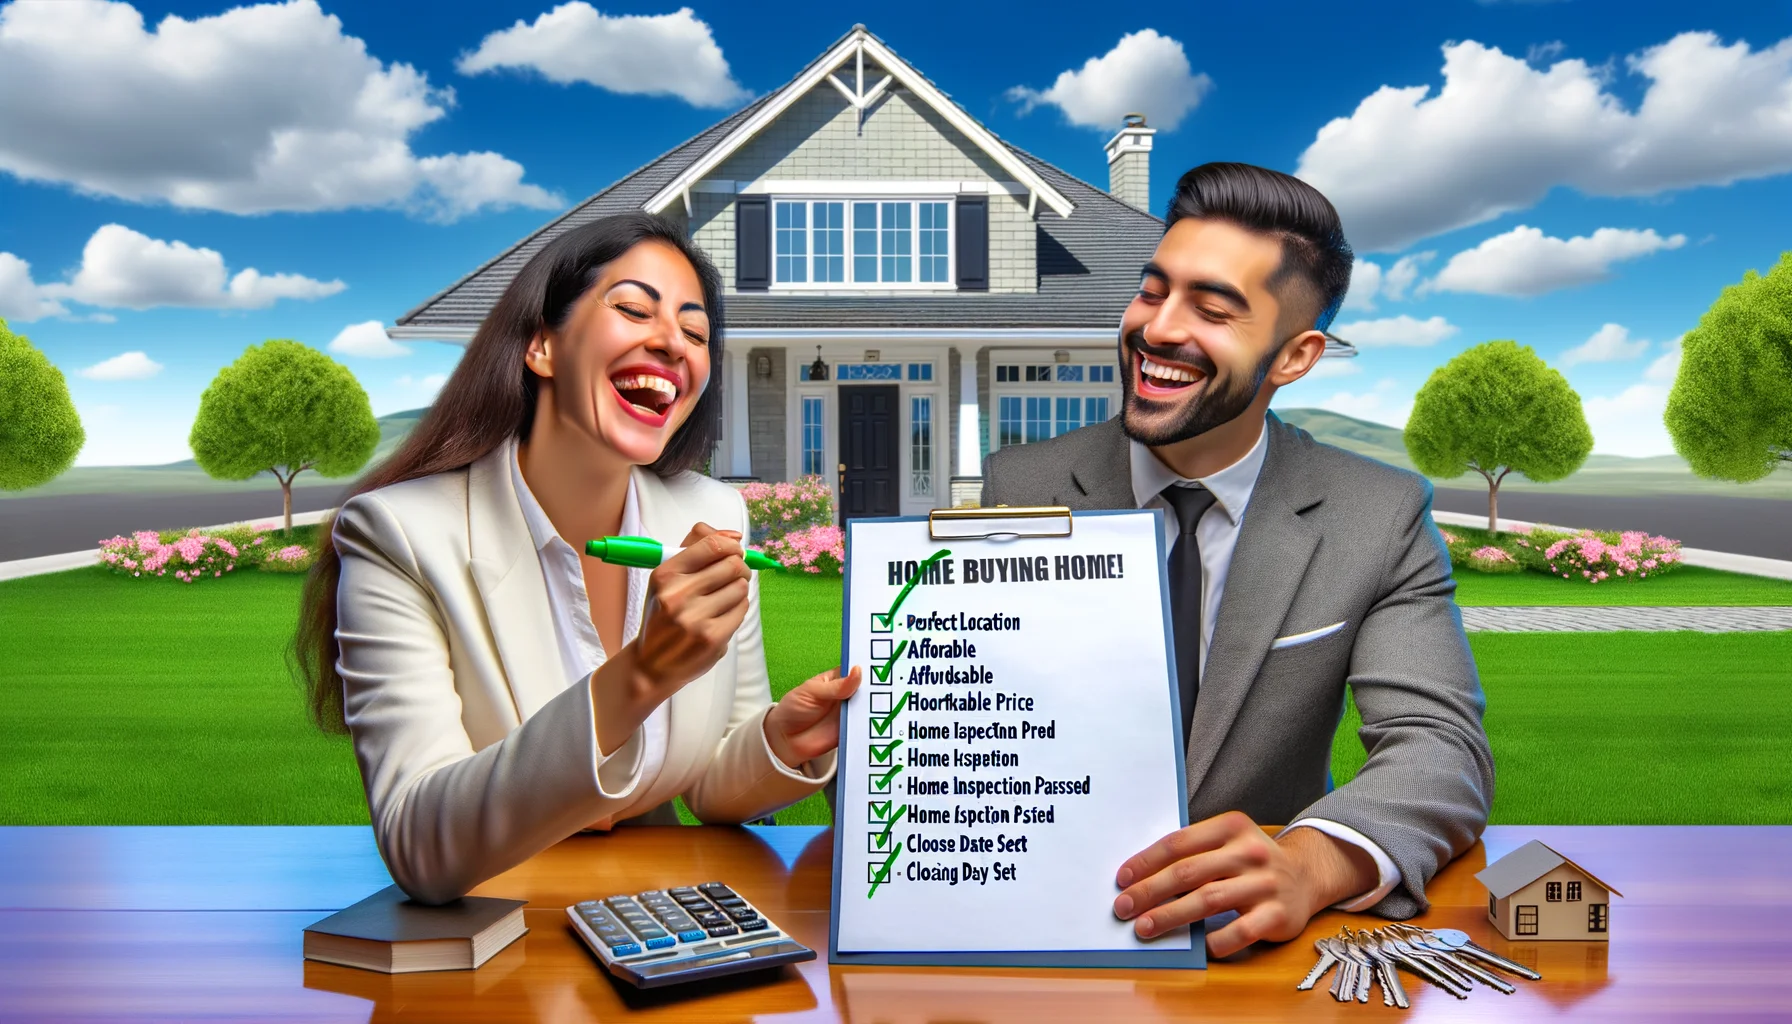 Imagine the most delightful and amusing scenario for a home buying process. A neatly-organized checklist is lying on a polished wooden table. On the checklist, items such as 'Perfect Location', 'Affordable Price', 'Home Inspection Passed', and 'Closing Date Set' are being checked off with a green marker by a joyful female real estate agent of South Asian descent. There's a male client of Middle-Eastern descent looking relieved and amused as well. In the background, make the dream home visible, a beautiful white-bricked house with a lush green lawn, under a perfect sunny, blue sky.